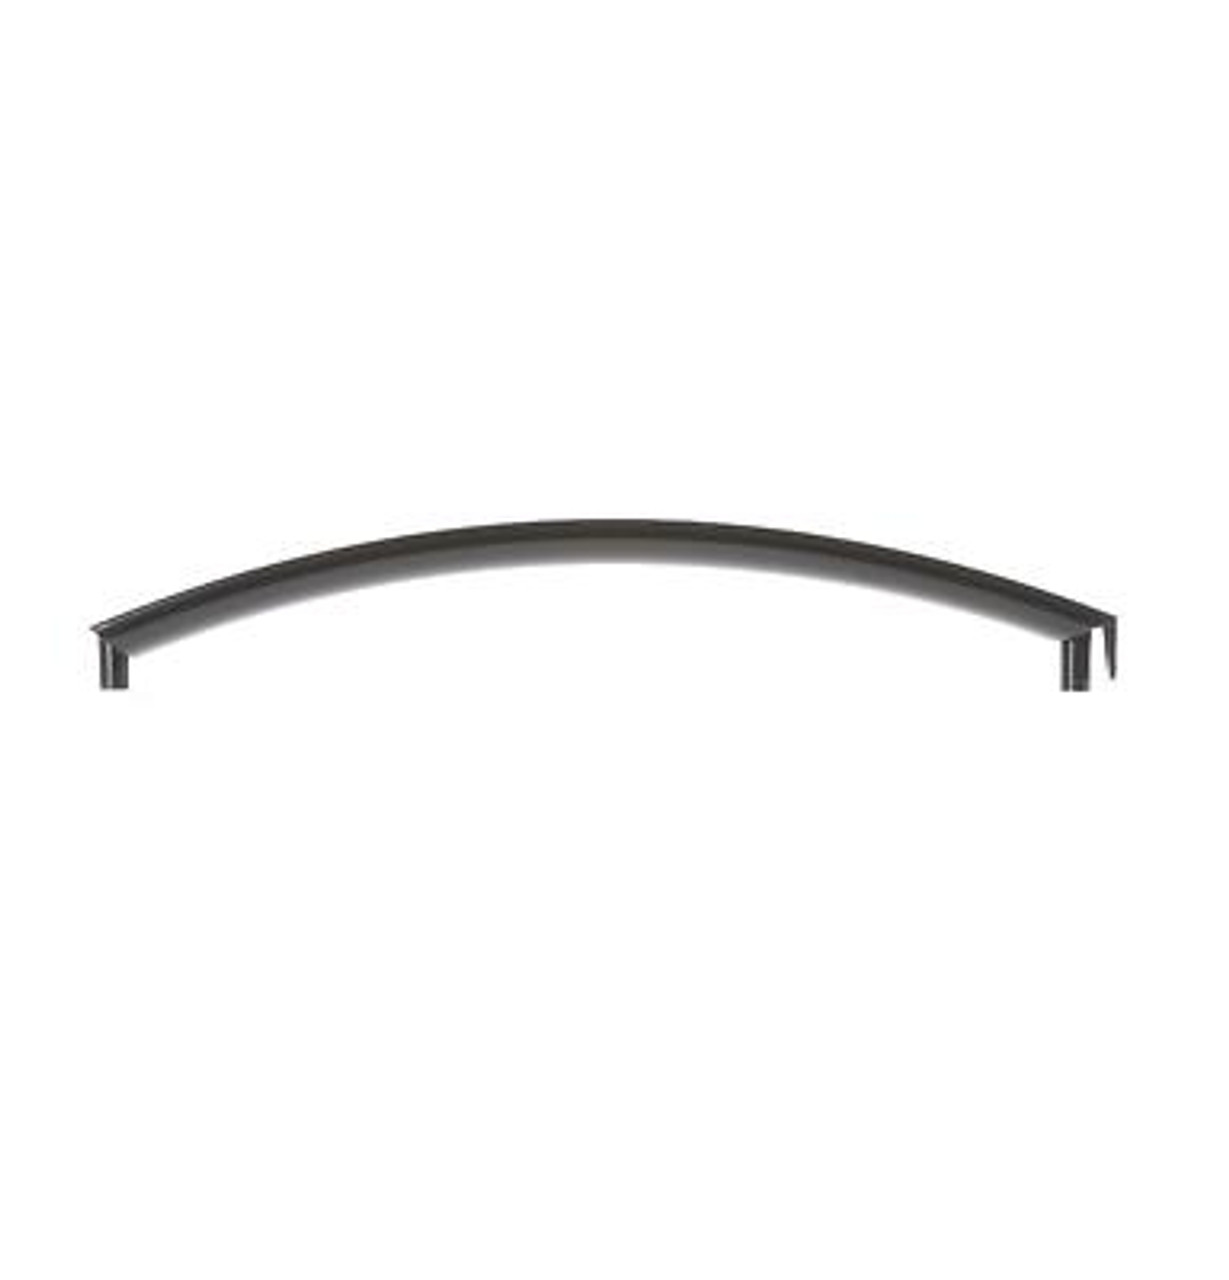 https://cdn11.bigcommerce.com/s-zrh8tkpr8d/images/stencil/1280x1280/products/8084/34742/door-handle-black-replacement-compatible-with-ge-microwave-wb15x10069-wb15x10082__44506.1665675595.jpg?c=2